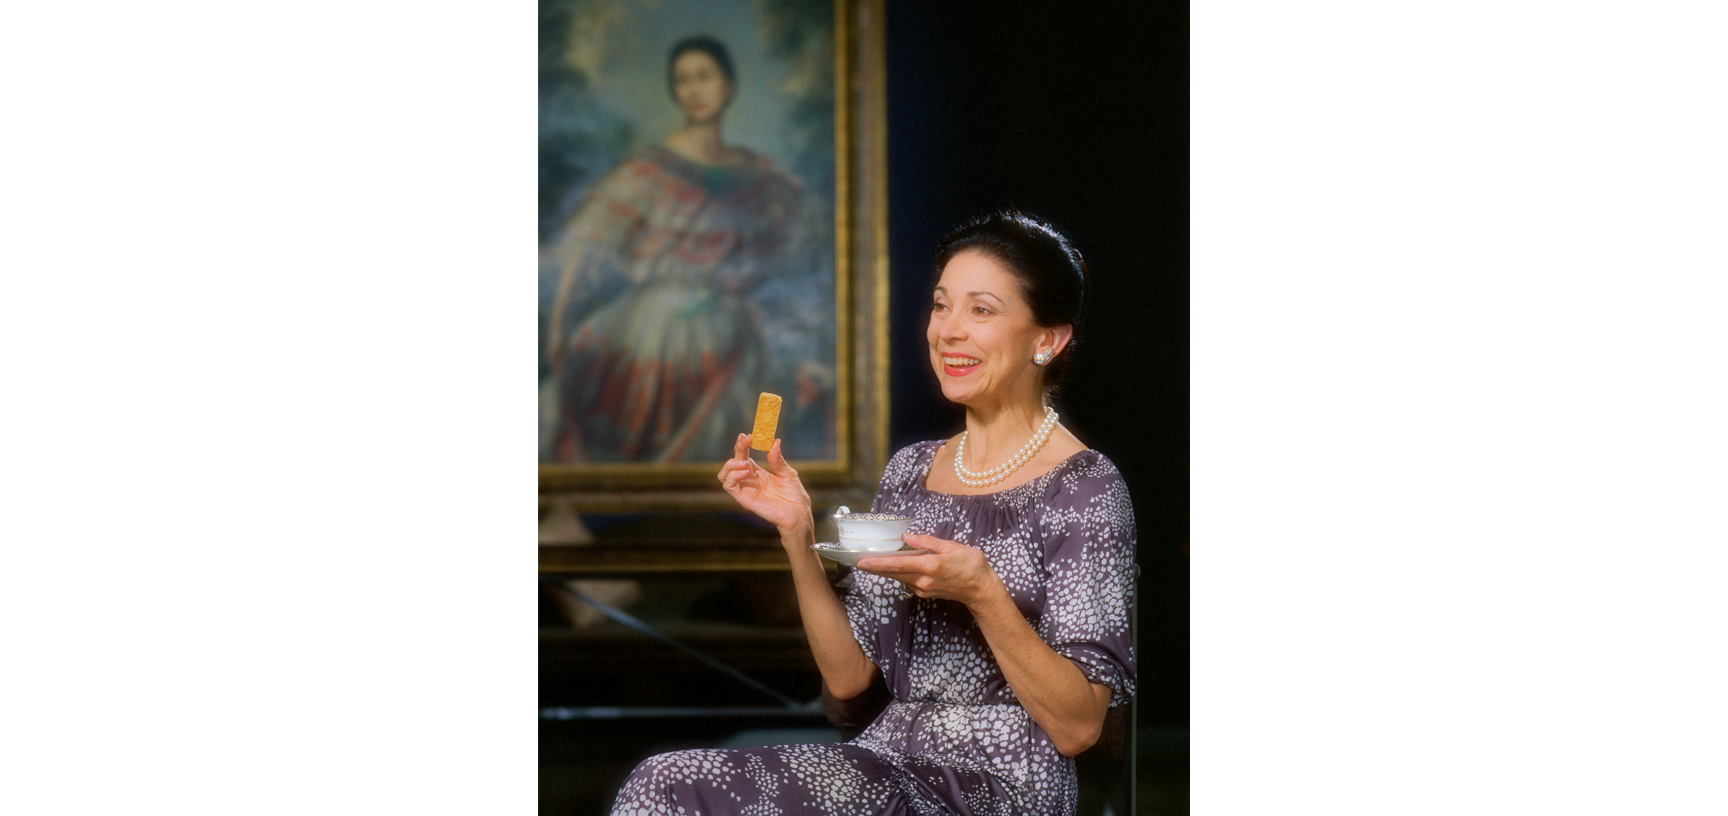 Portrait of Margot Fonteyn - a middle aged white woman with dark hair up in a bun, wearing a purple and white flower patterned dress, sitting in a chair with a cup of tea and biscuit in hand, sat in front of a large oil painting